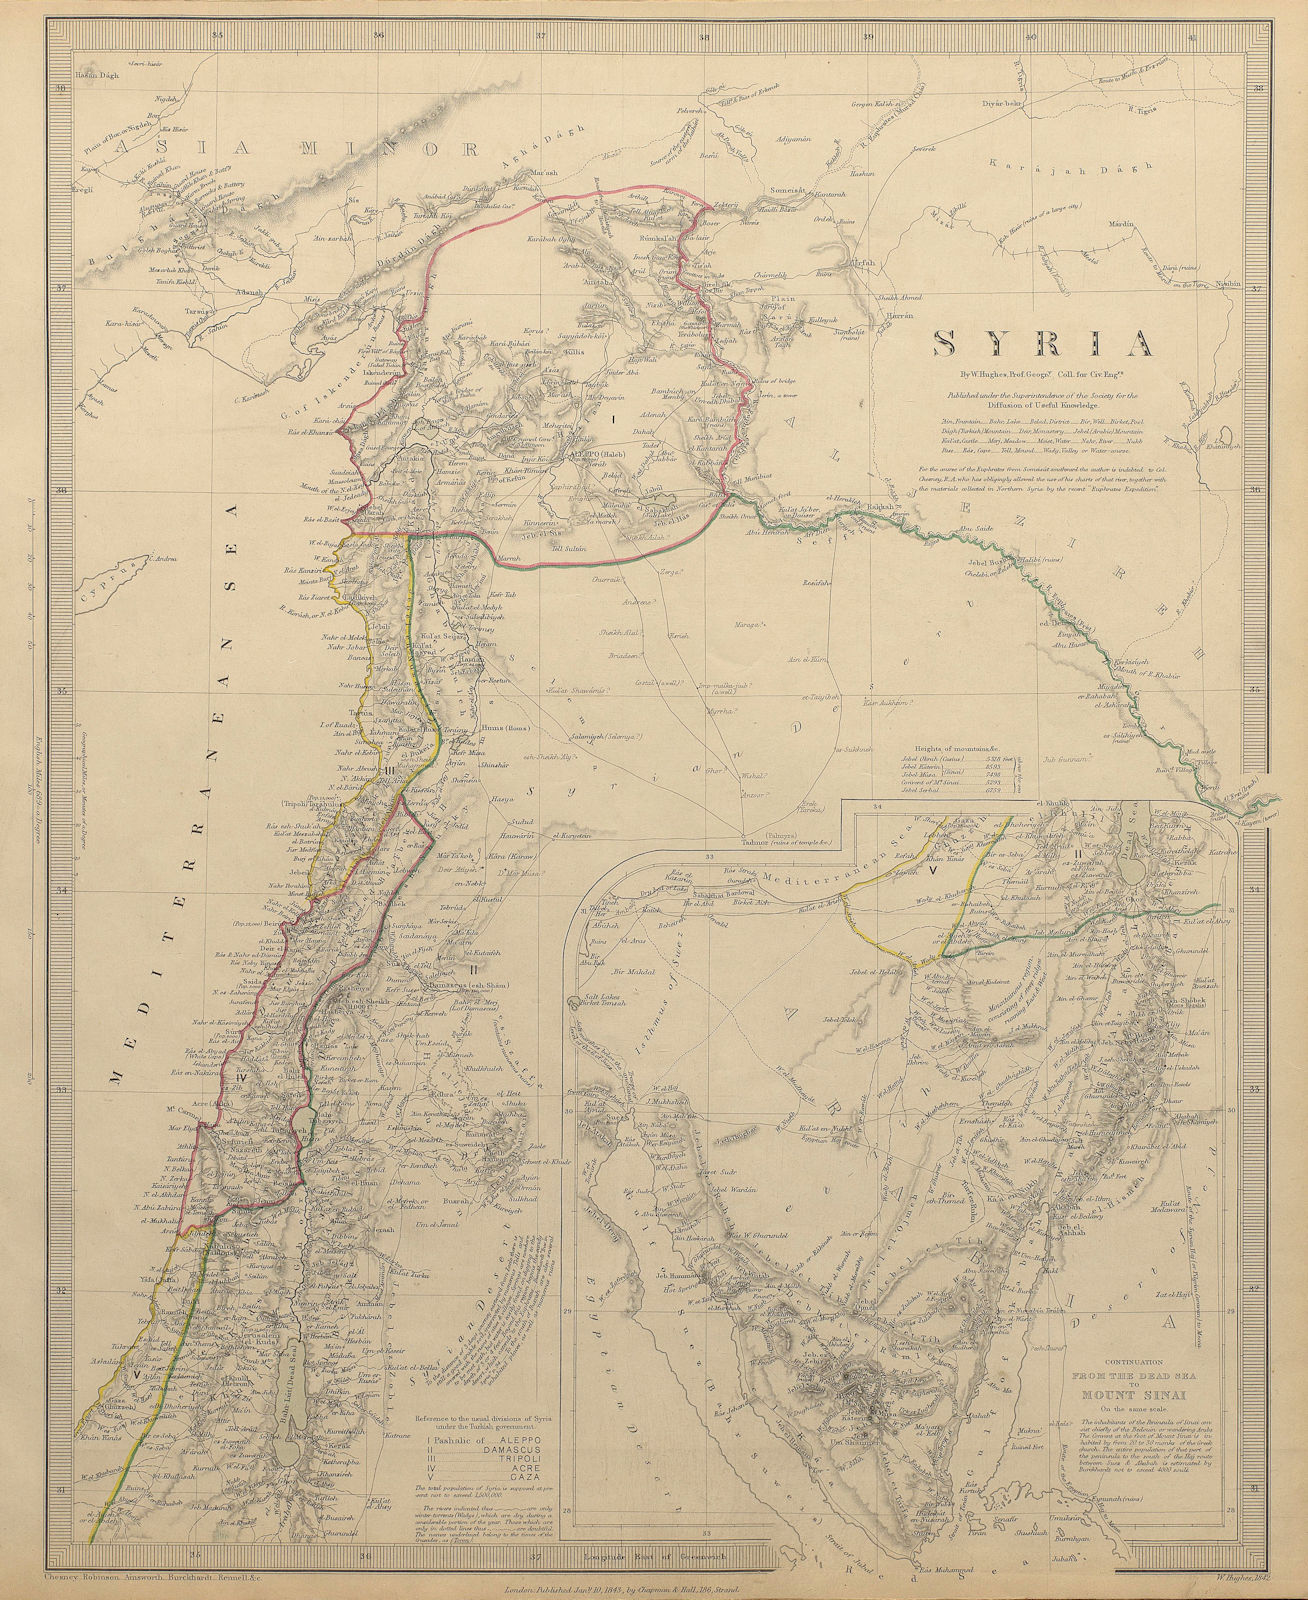 LEVANT. Syria (Modern) ; inset from the Dead Sea to Mount Sinai. SDUK 1844 map